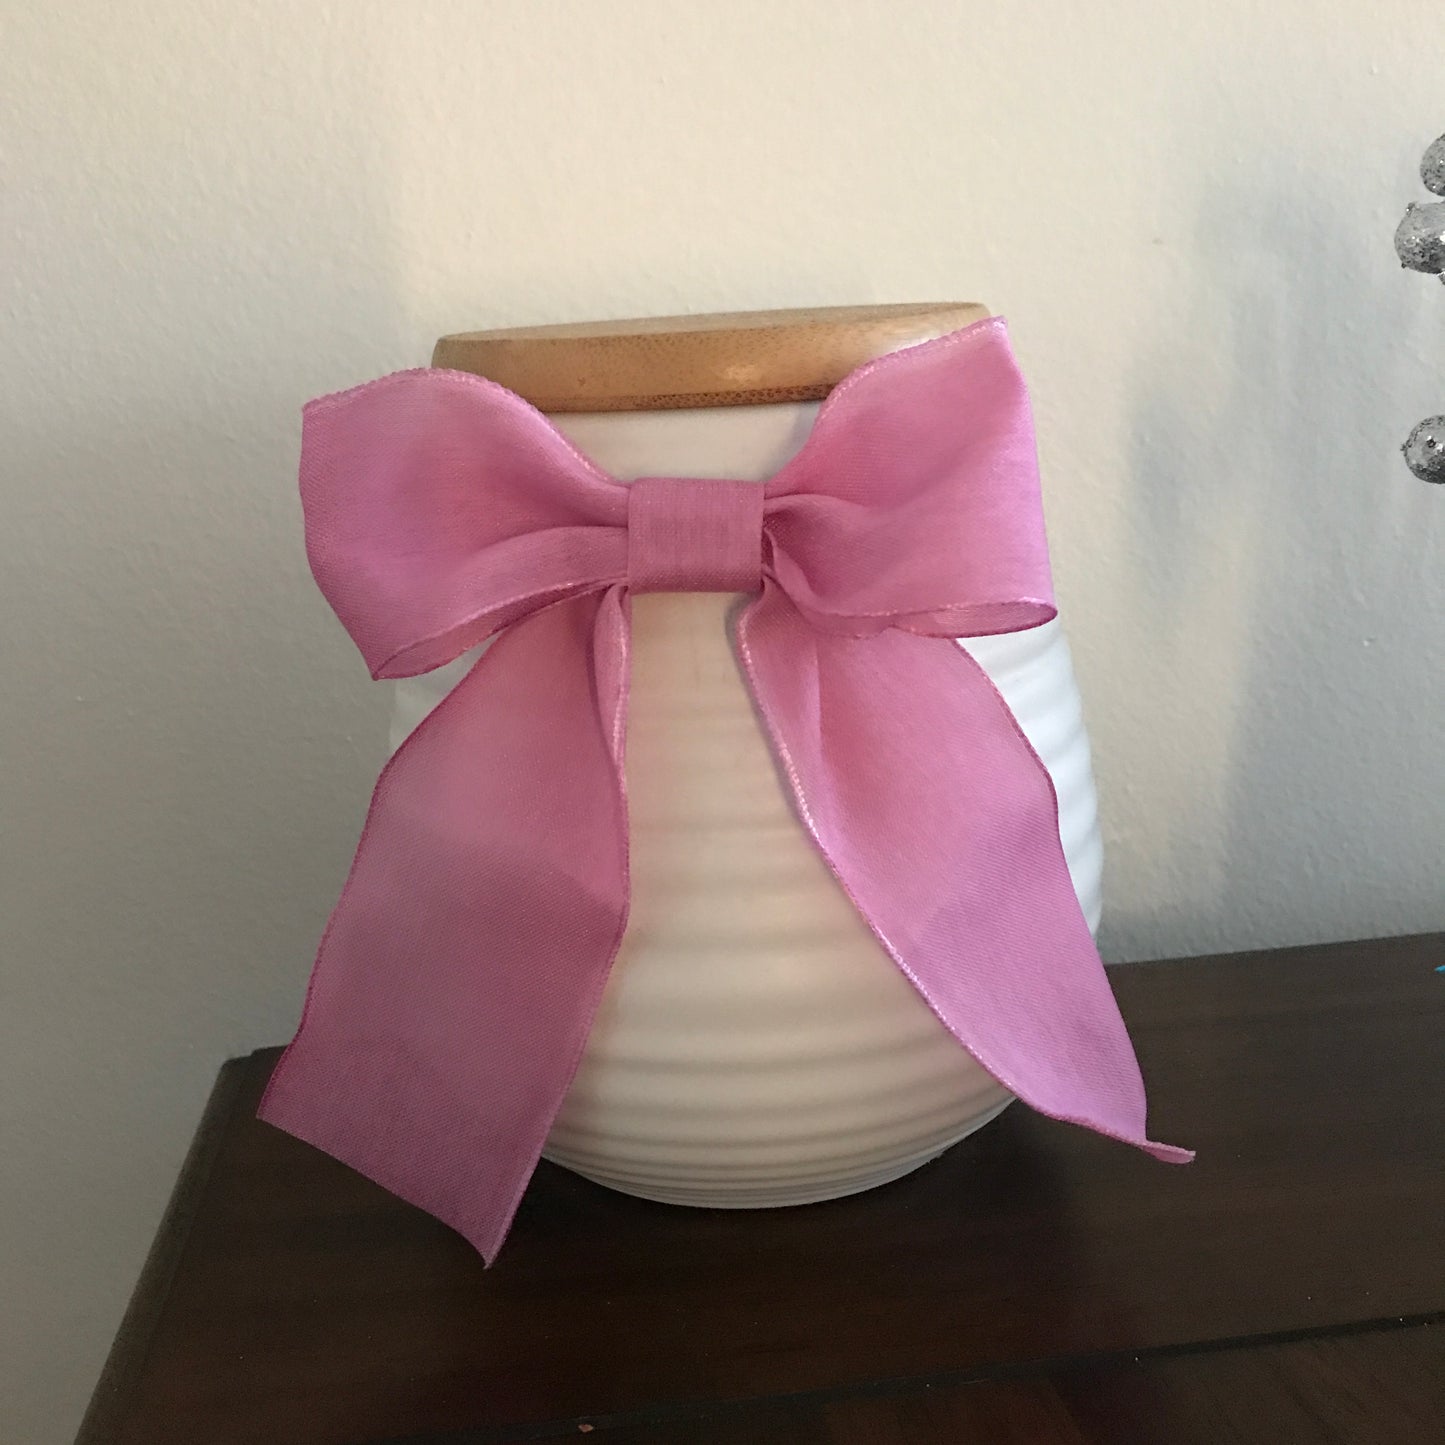 Handmade Hand-Crafted Lavender Pink Bows 3pcs